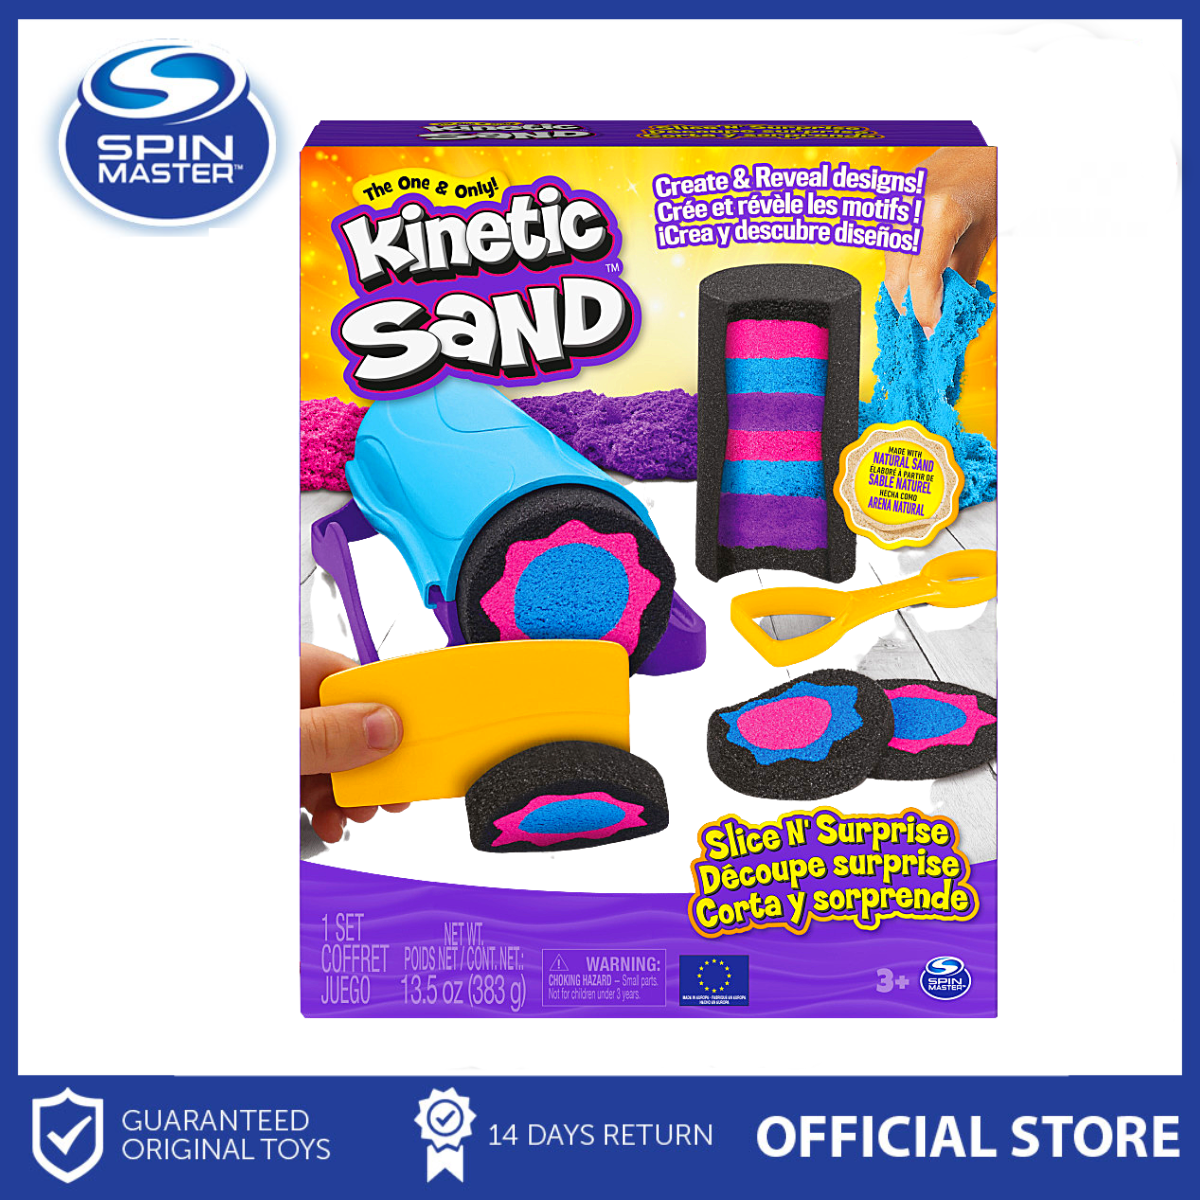 Kinetic Sand Sandisfactory Playset with Colored Kinetic Sand and 10 Tools  for Molds, Toys For Kids Boys Girls Ages 3 and Up